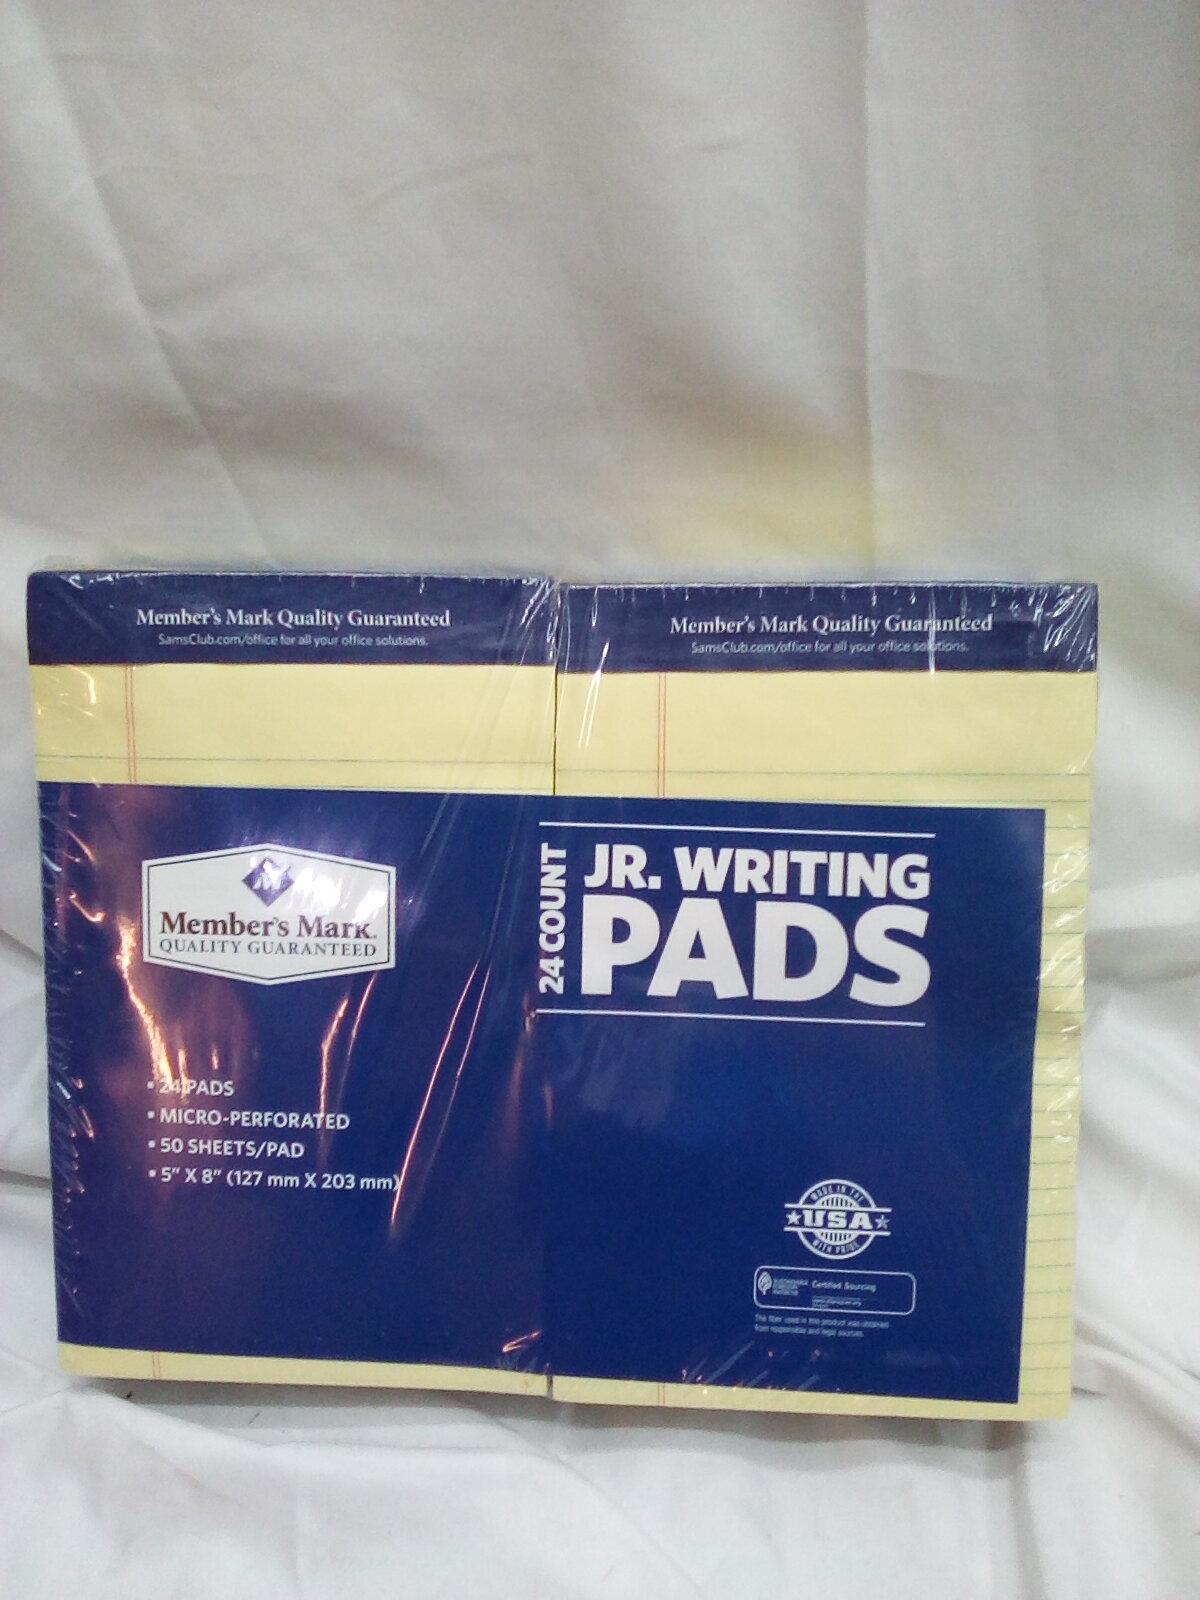 Member’s Mark 24 count jr. writing pads 50 sheets each 5x8”